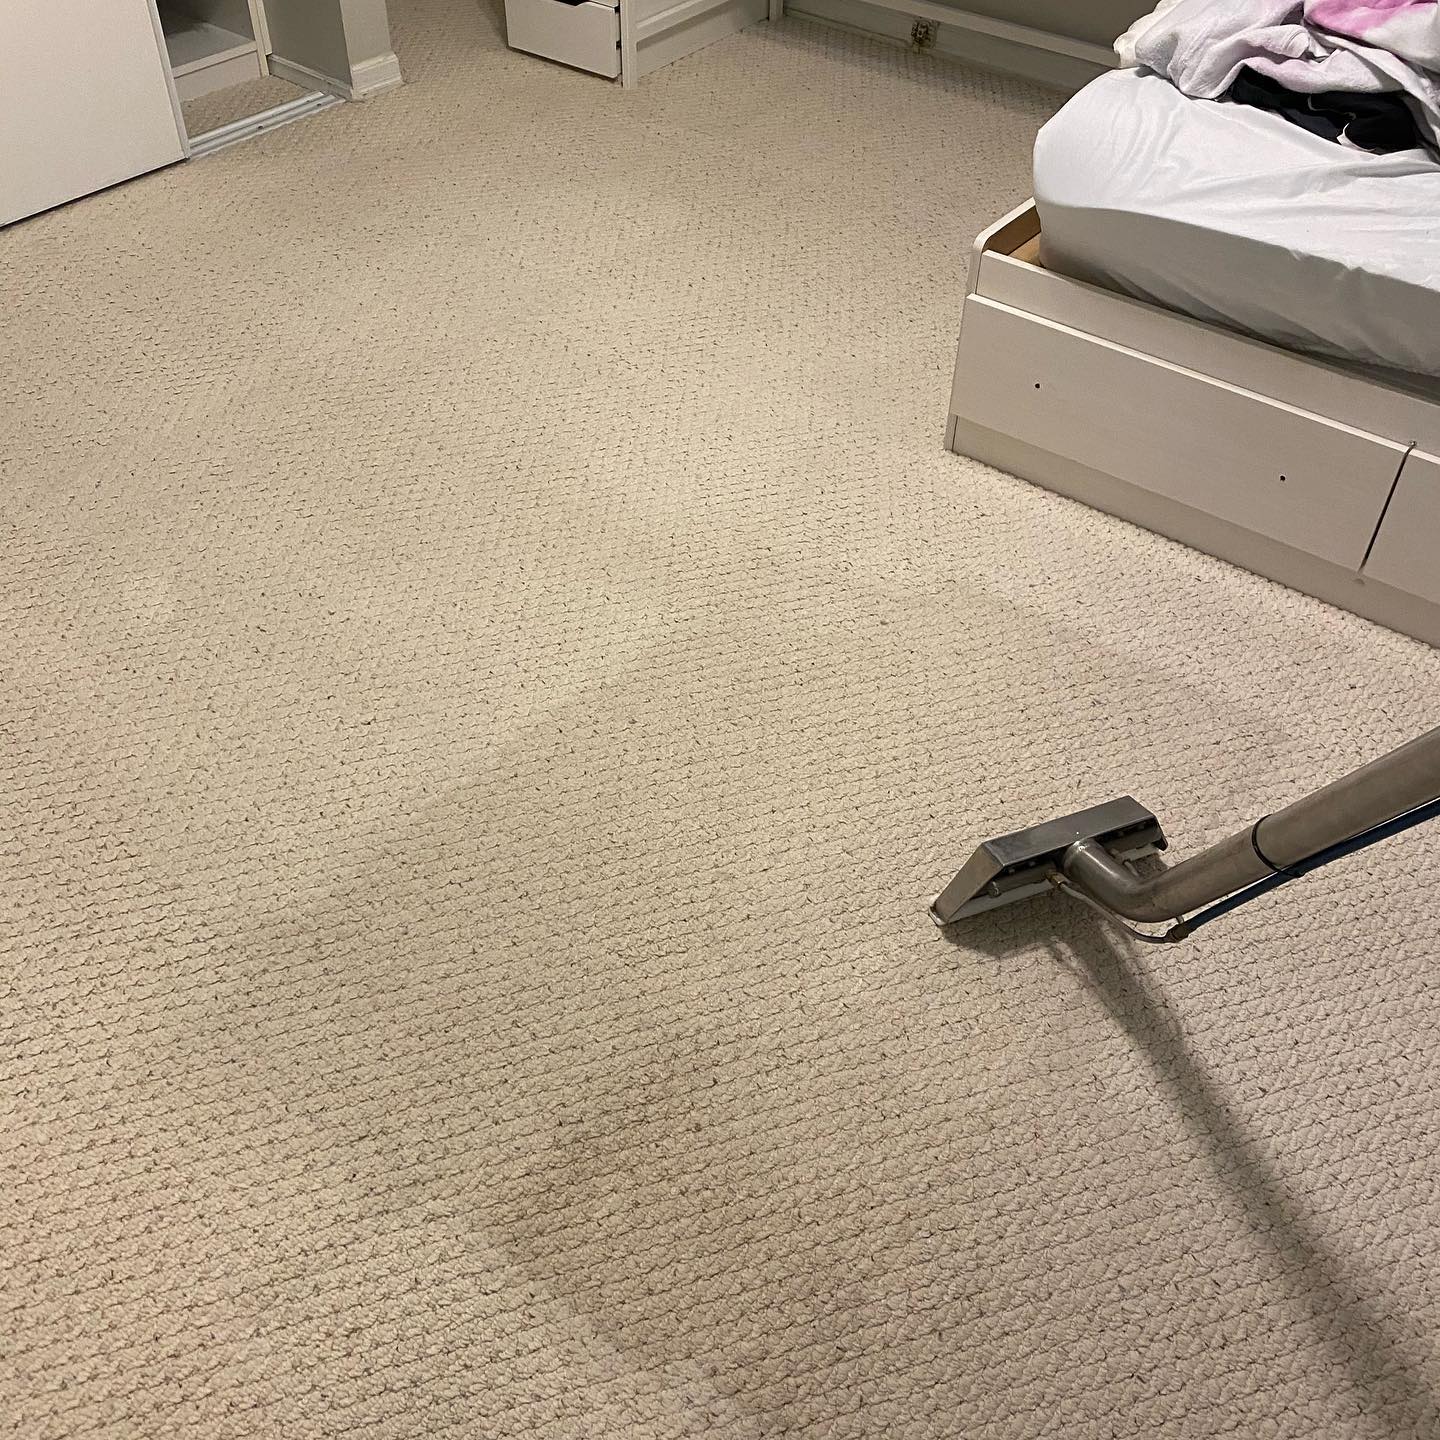 Things To Know Before Hiring Carpet Cleaning, Furniture Cleaning, and Carpet Care